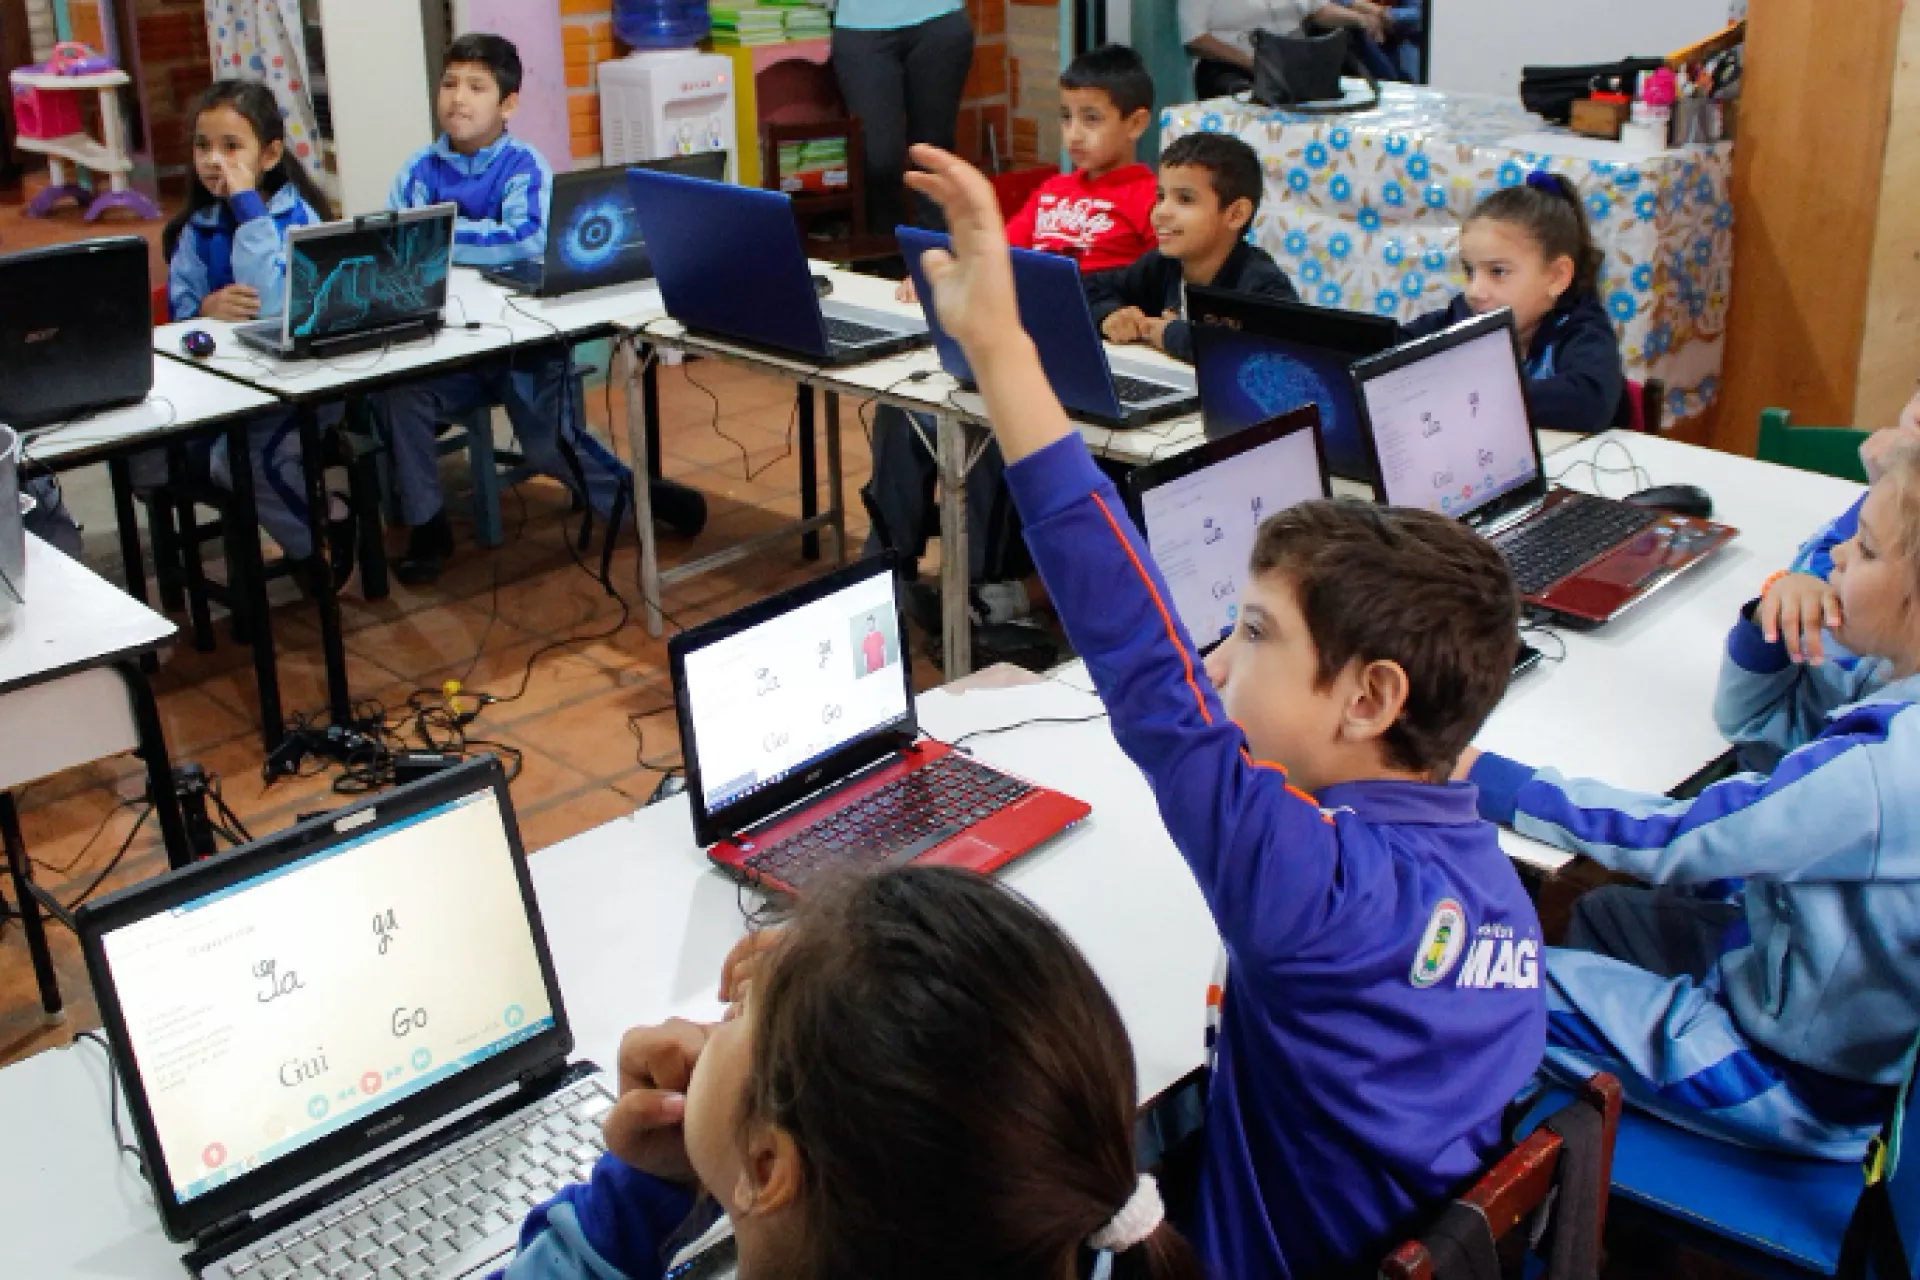 Classroom with children on laptops using the ADT, one child raises his hand.